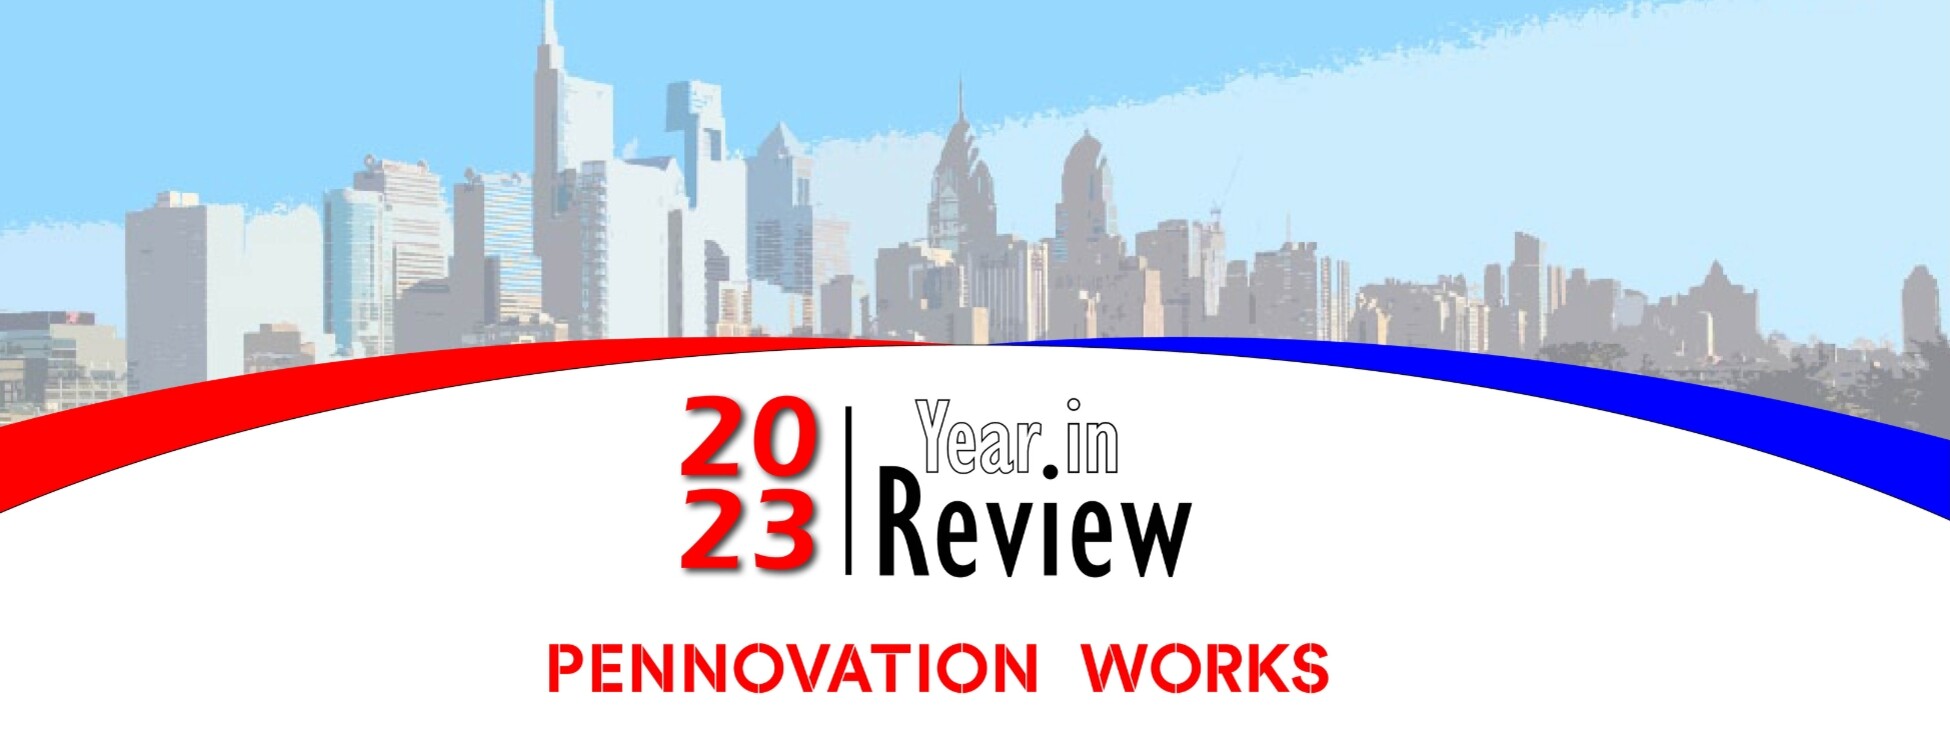 Pennovation Works Year in Review 2023 